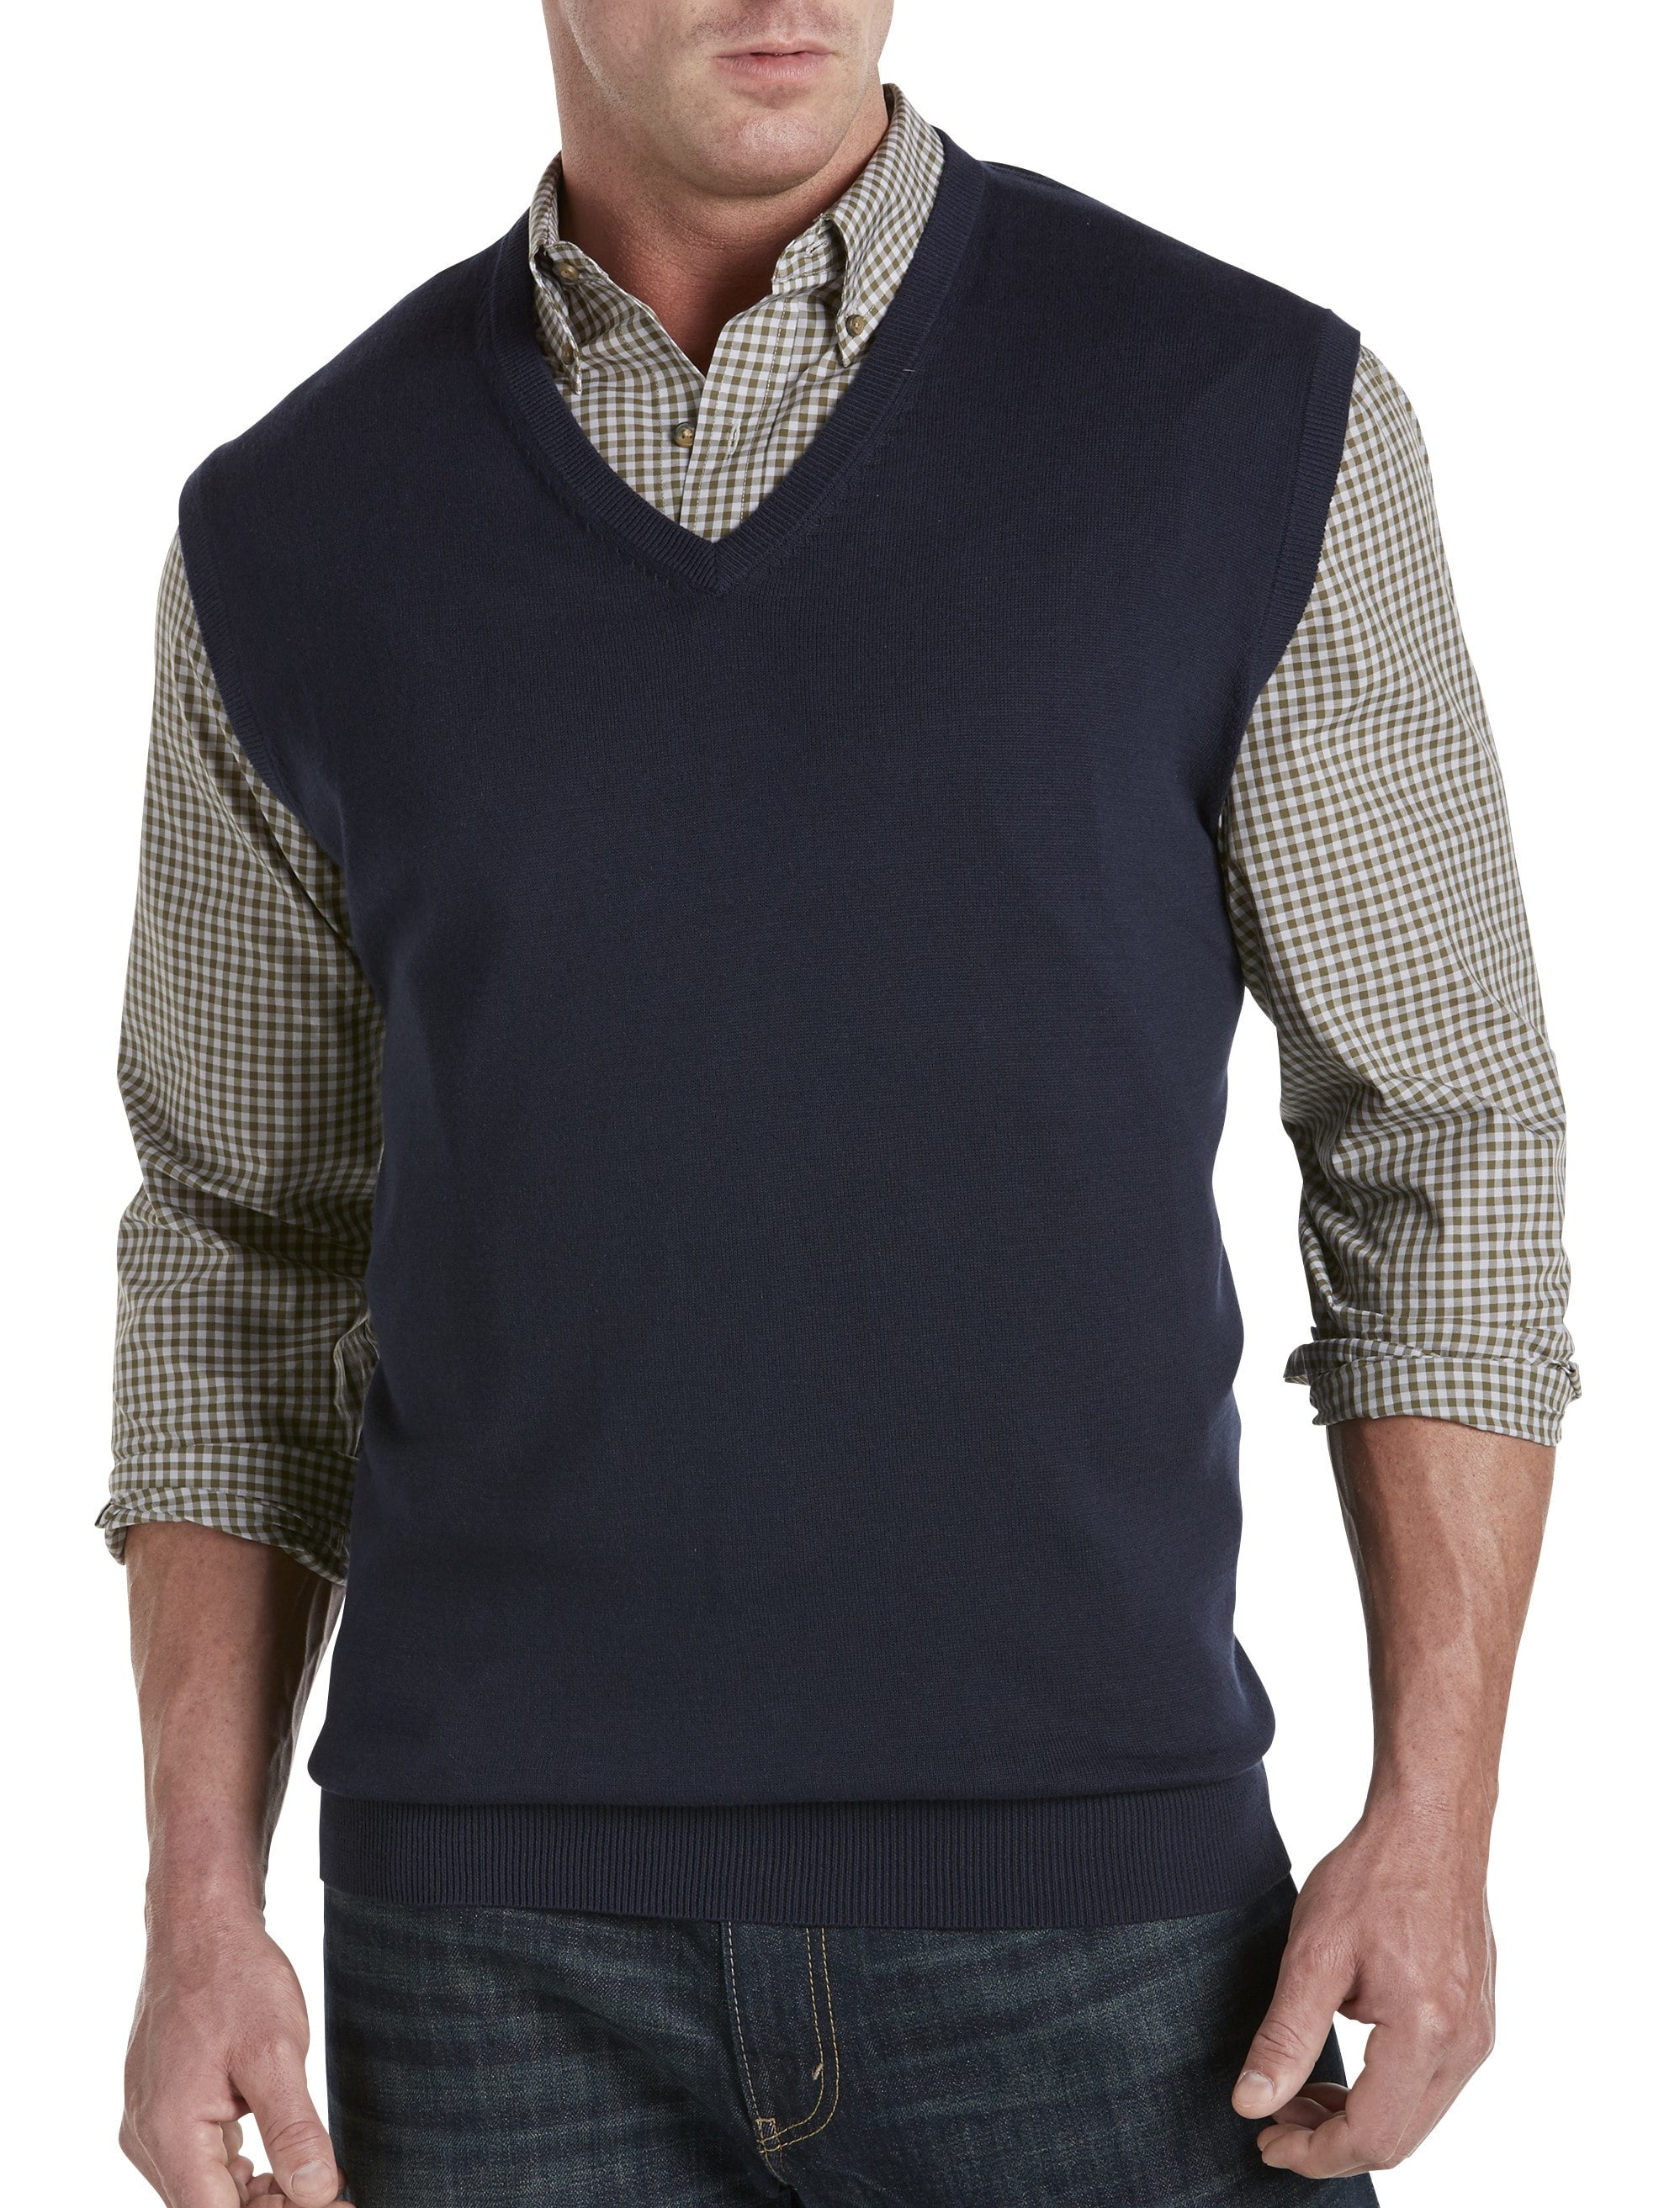 Harbor Bay by DXL Big and Tall Men's V-Neck Sweater Vest, Navy, 3XL ...